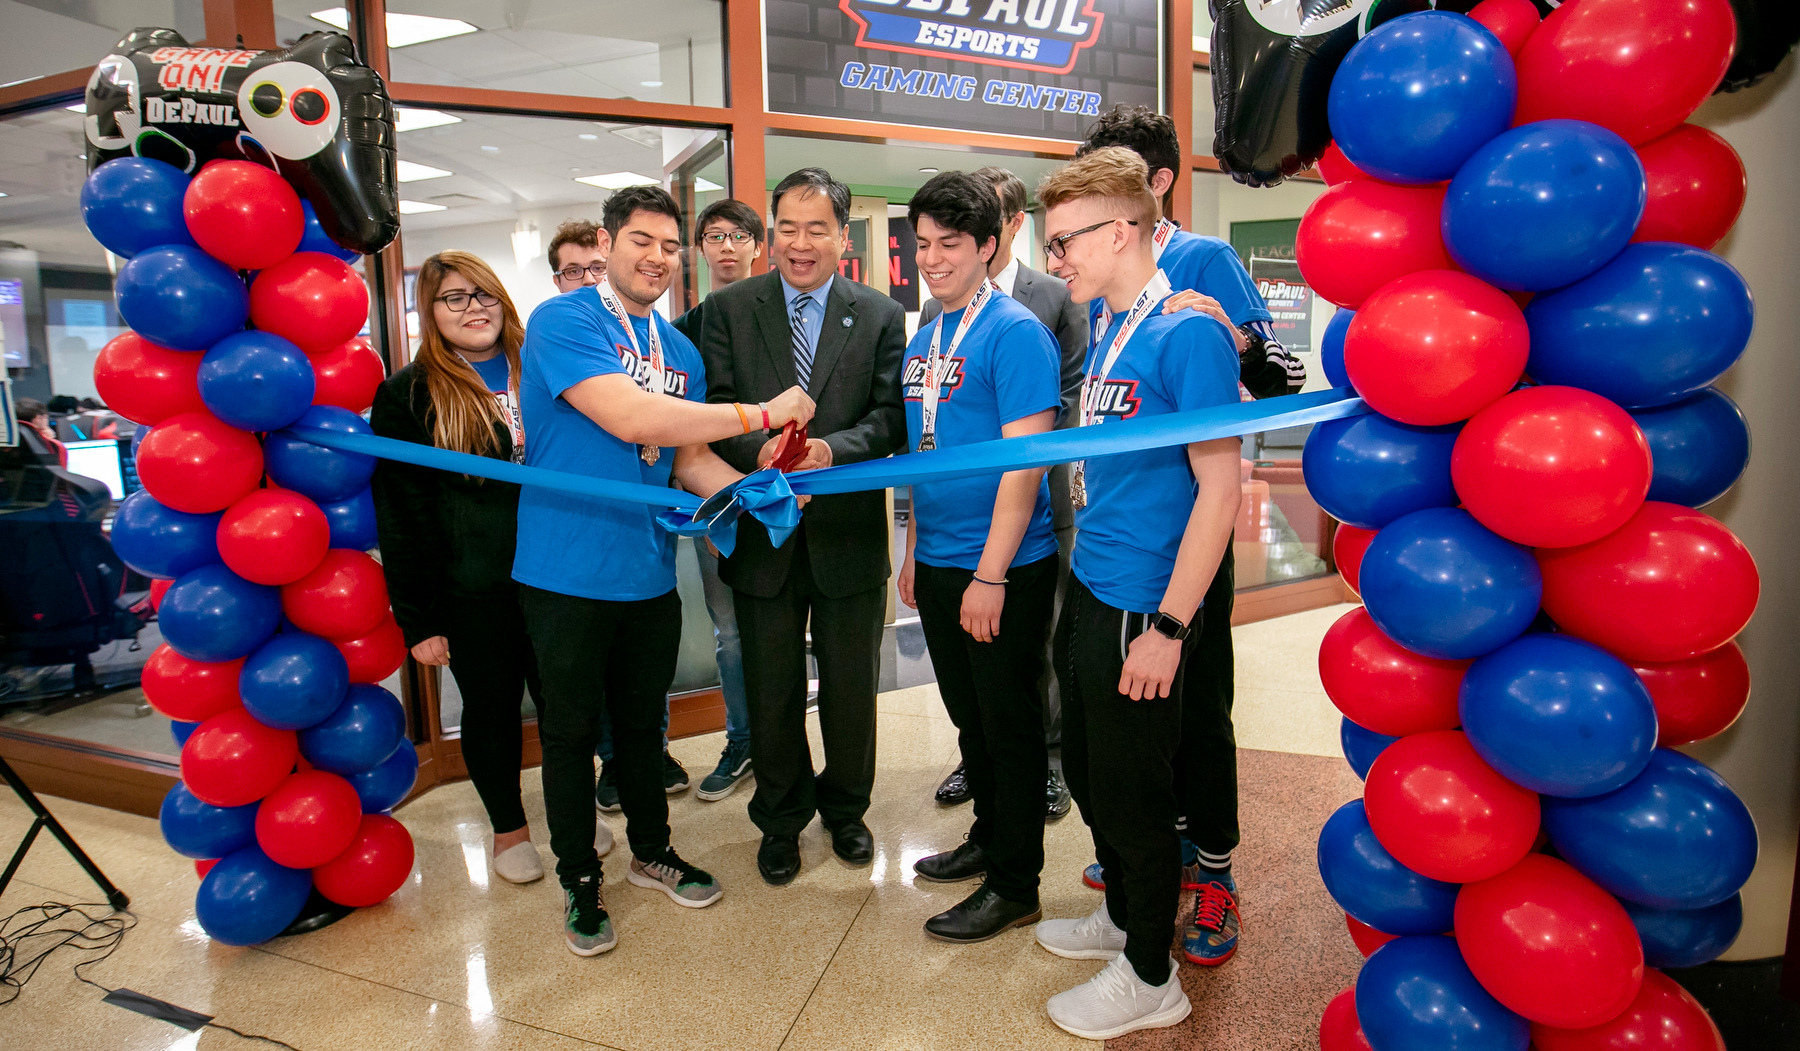 Ready Player 1: DePaul Opens New Esports Gaming Center